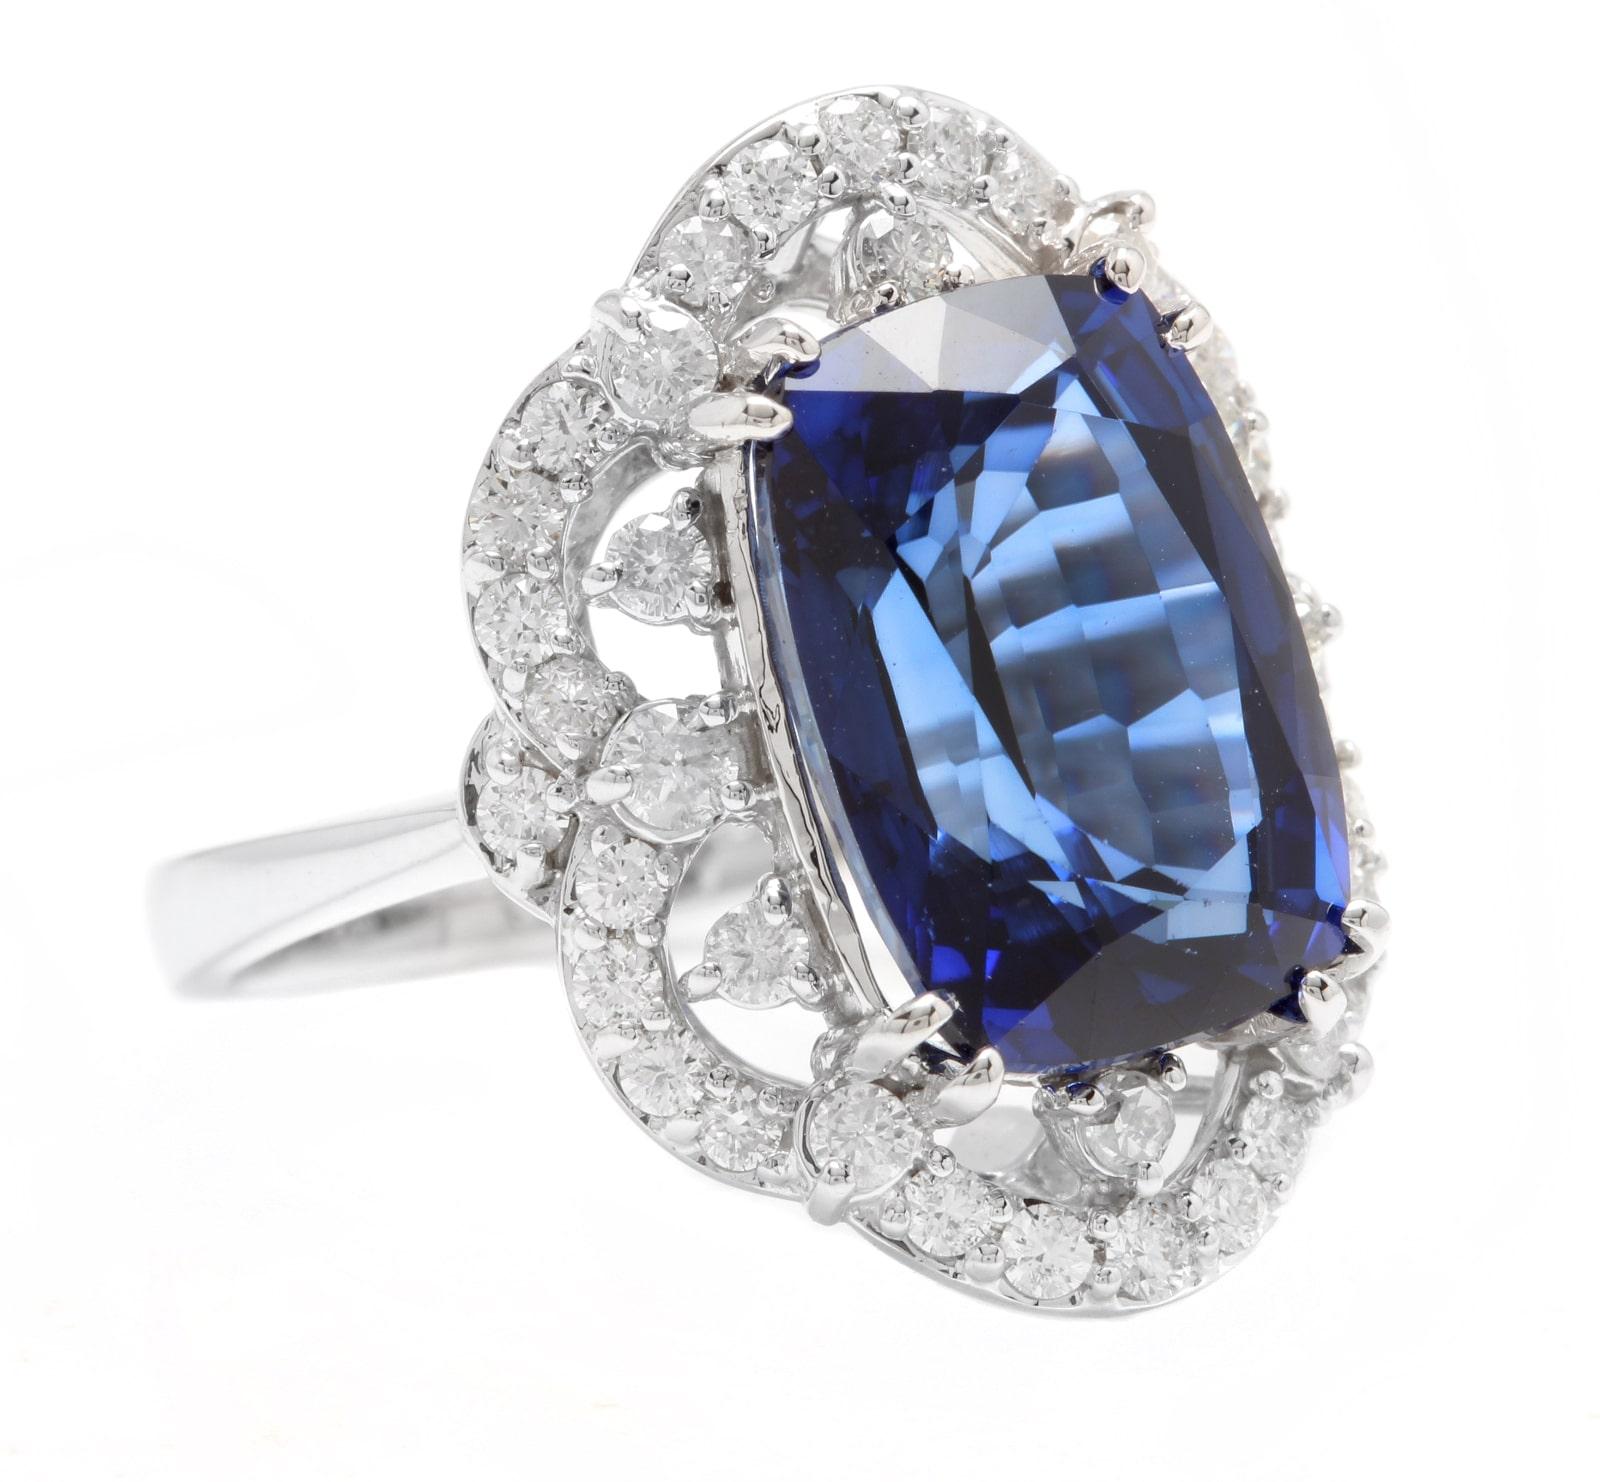 10.80 Carats Lab Created Ceylon Blue Sapphire and Natural Diamond 14K Solid White Gold Ring

Suggested Replacement Value $5,000.00

Total Blue Sapphire Weight is Approx. : 10.00 Carats (Lab Created)

Sapphire Measures: 14 x 10mm 

Natural Untreated